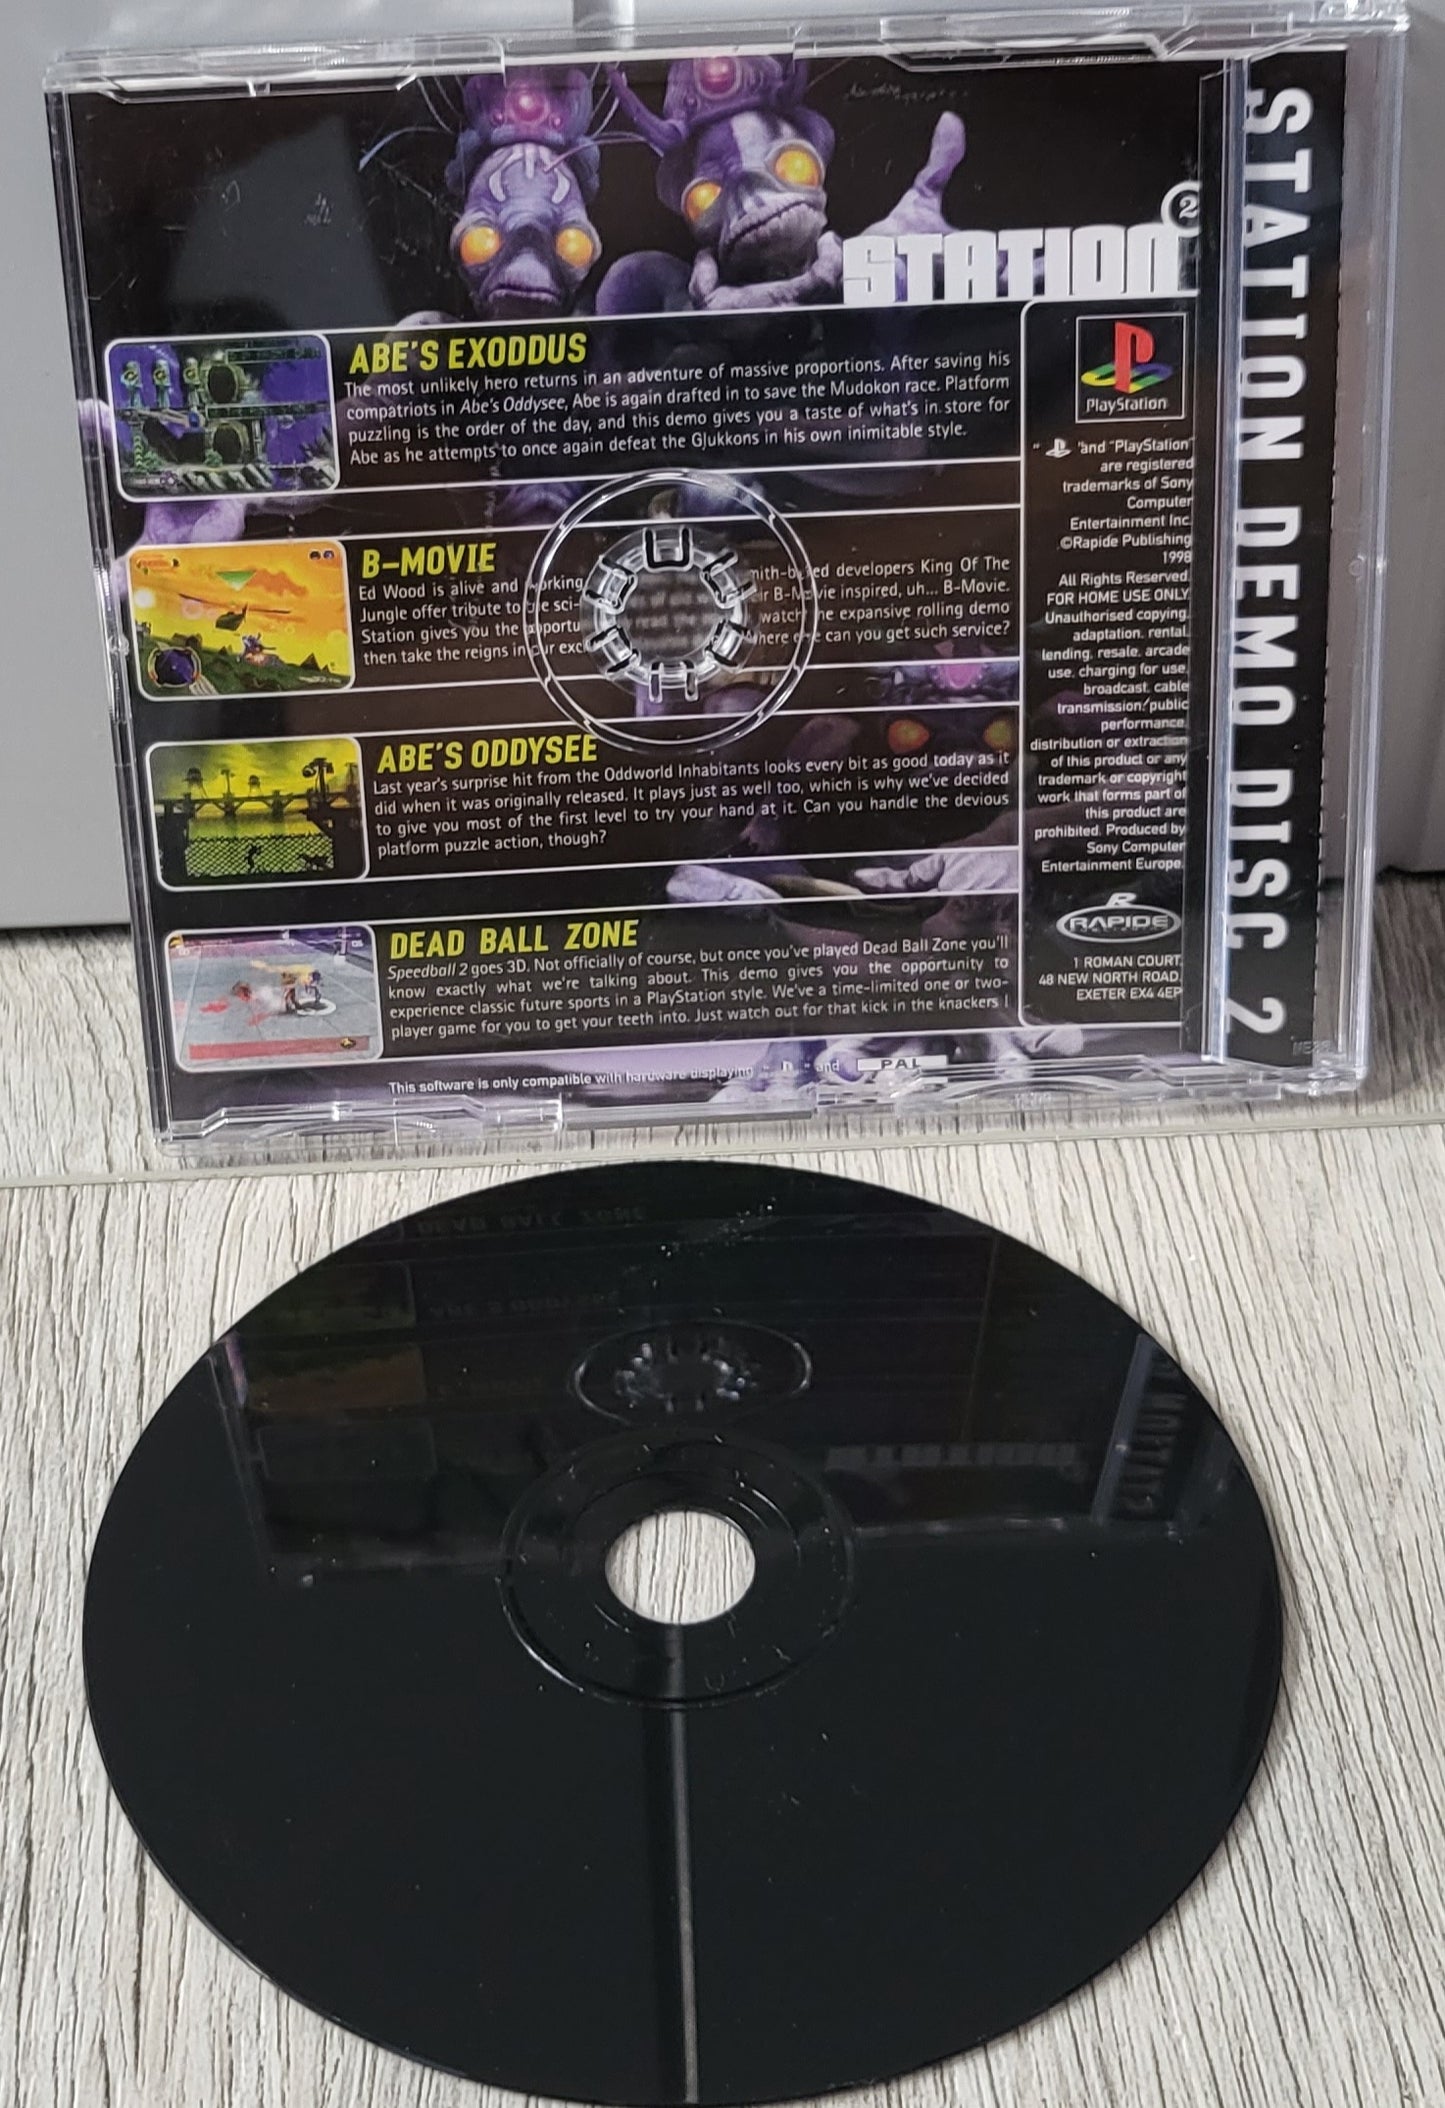 Station Demo Disc 2 Sony Playstation 1 (PS1) RARE